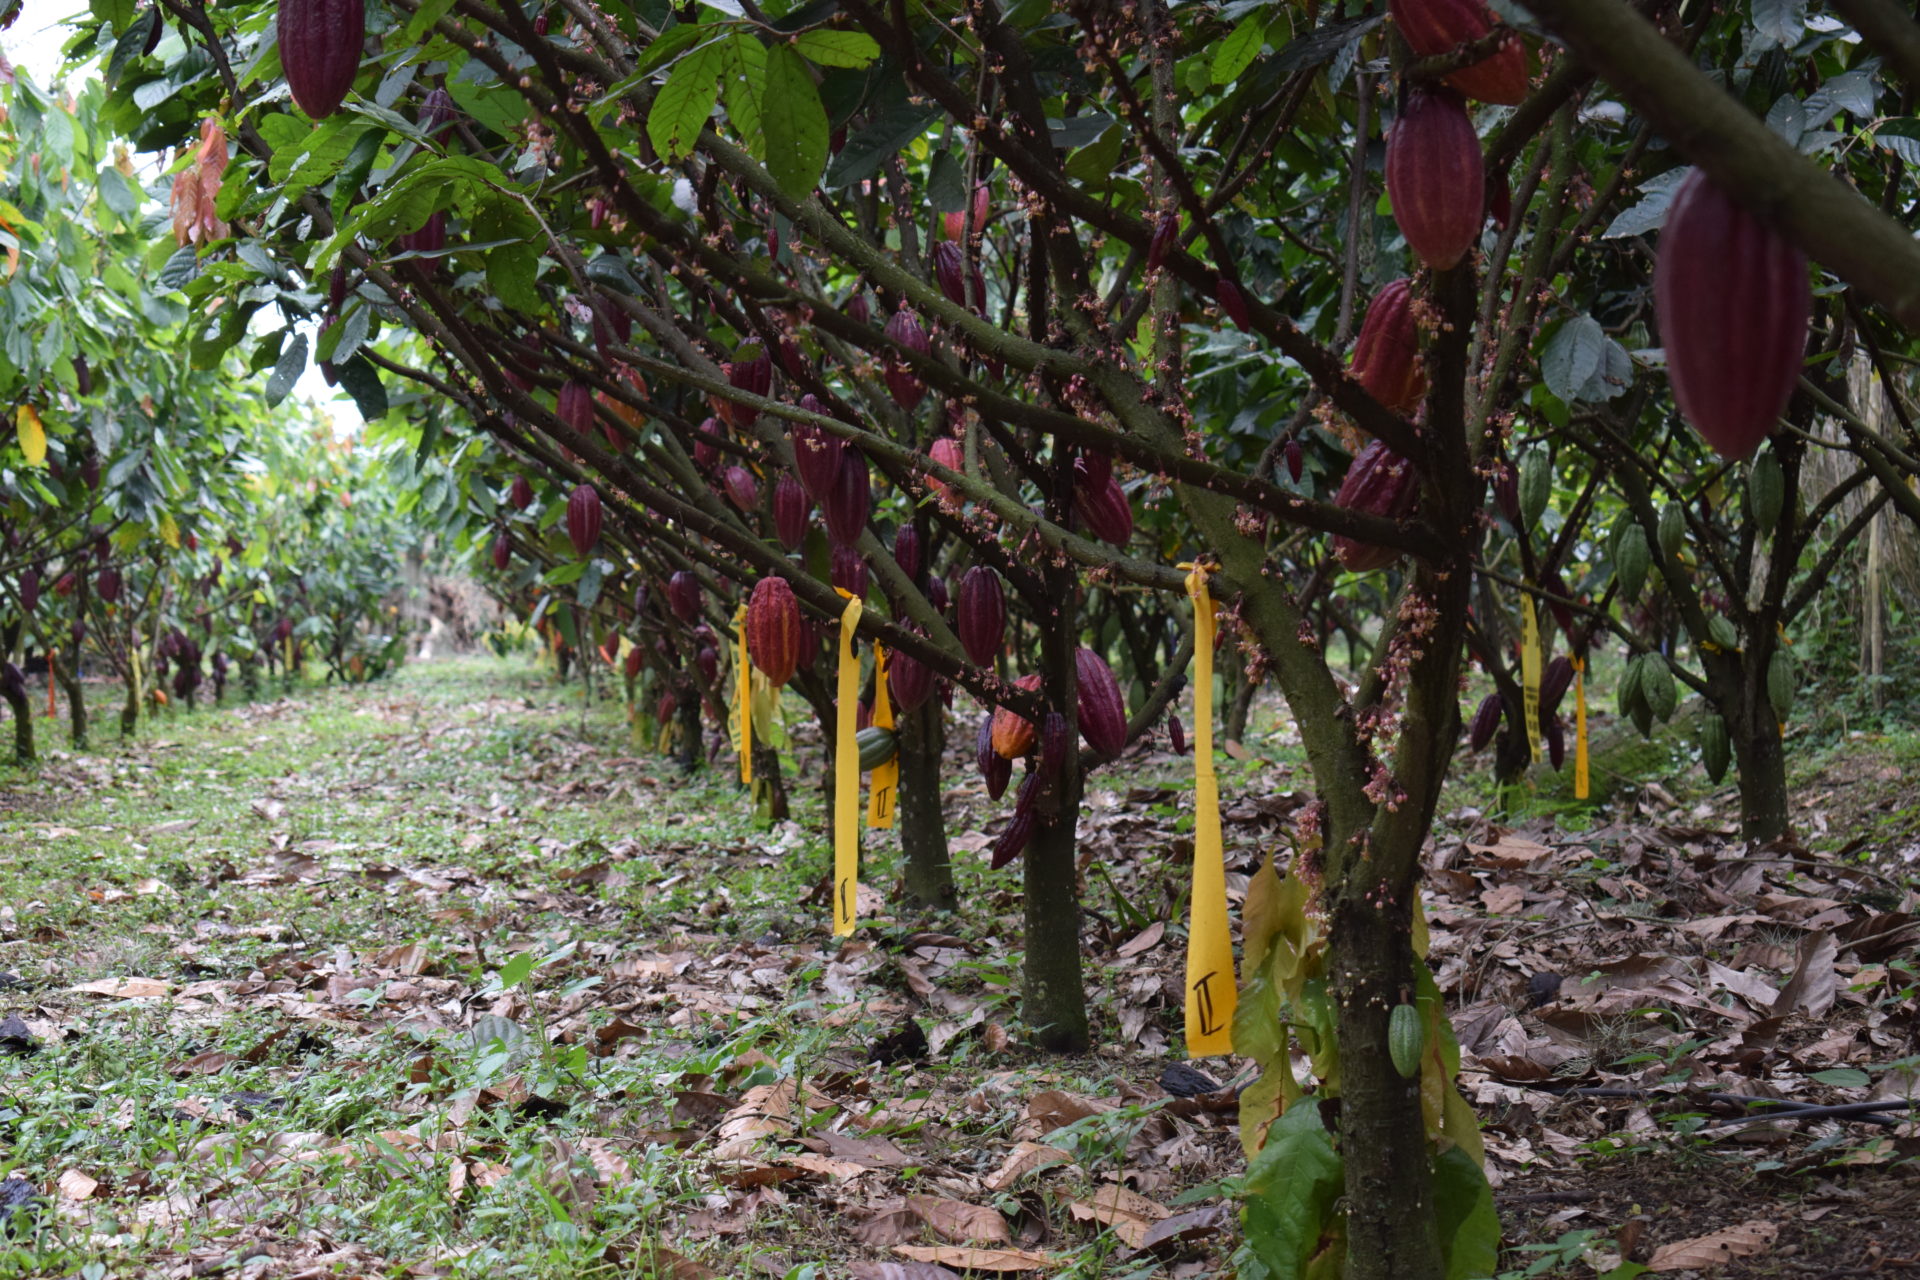 Cacao trees in Colombia.